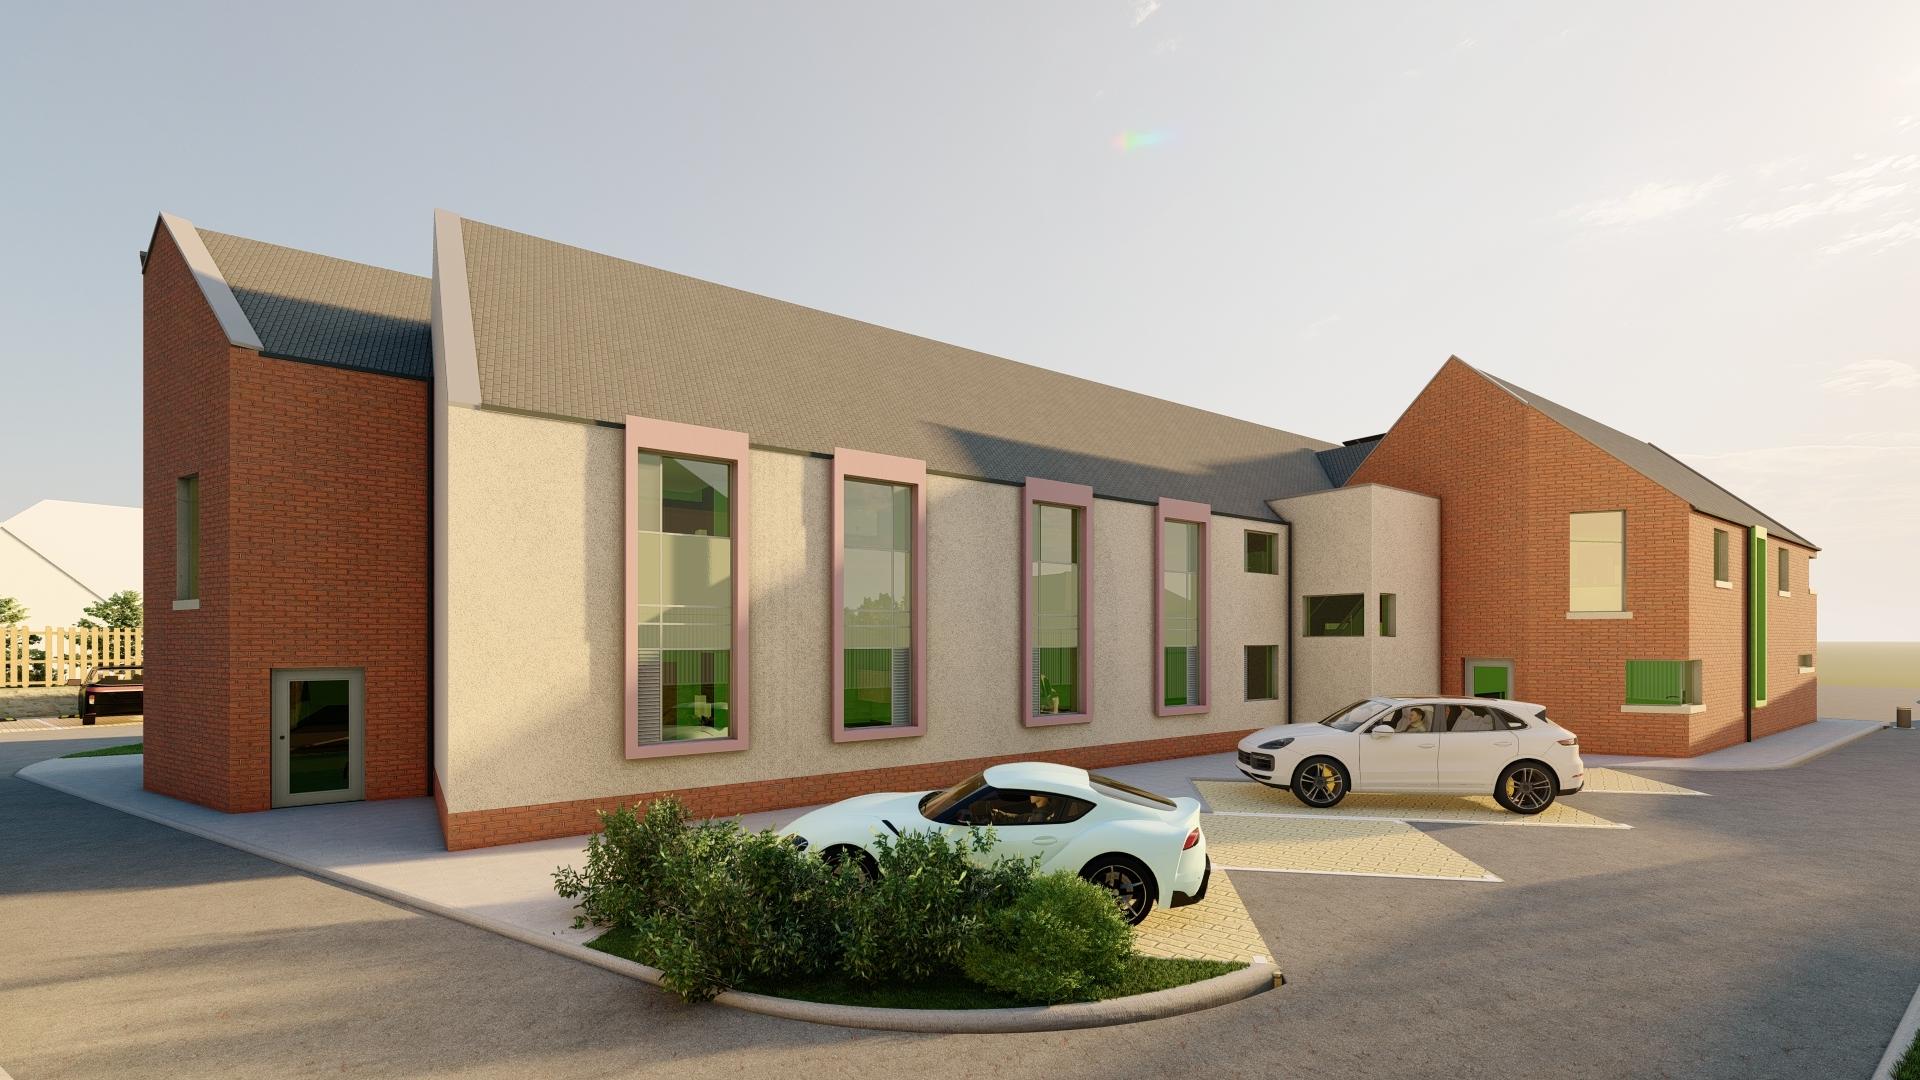 Planning application submitted for ambitious scheme to transform Hedingham Medical Centre into a high-quality and sustainable healthcare facility